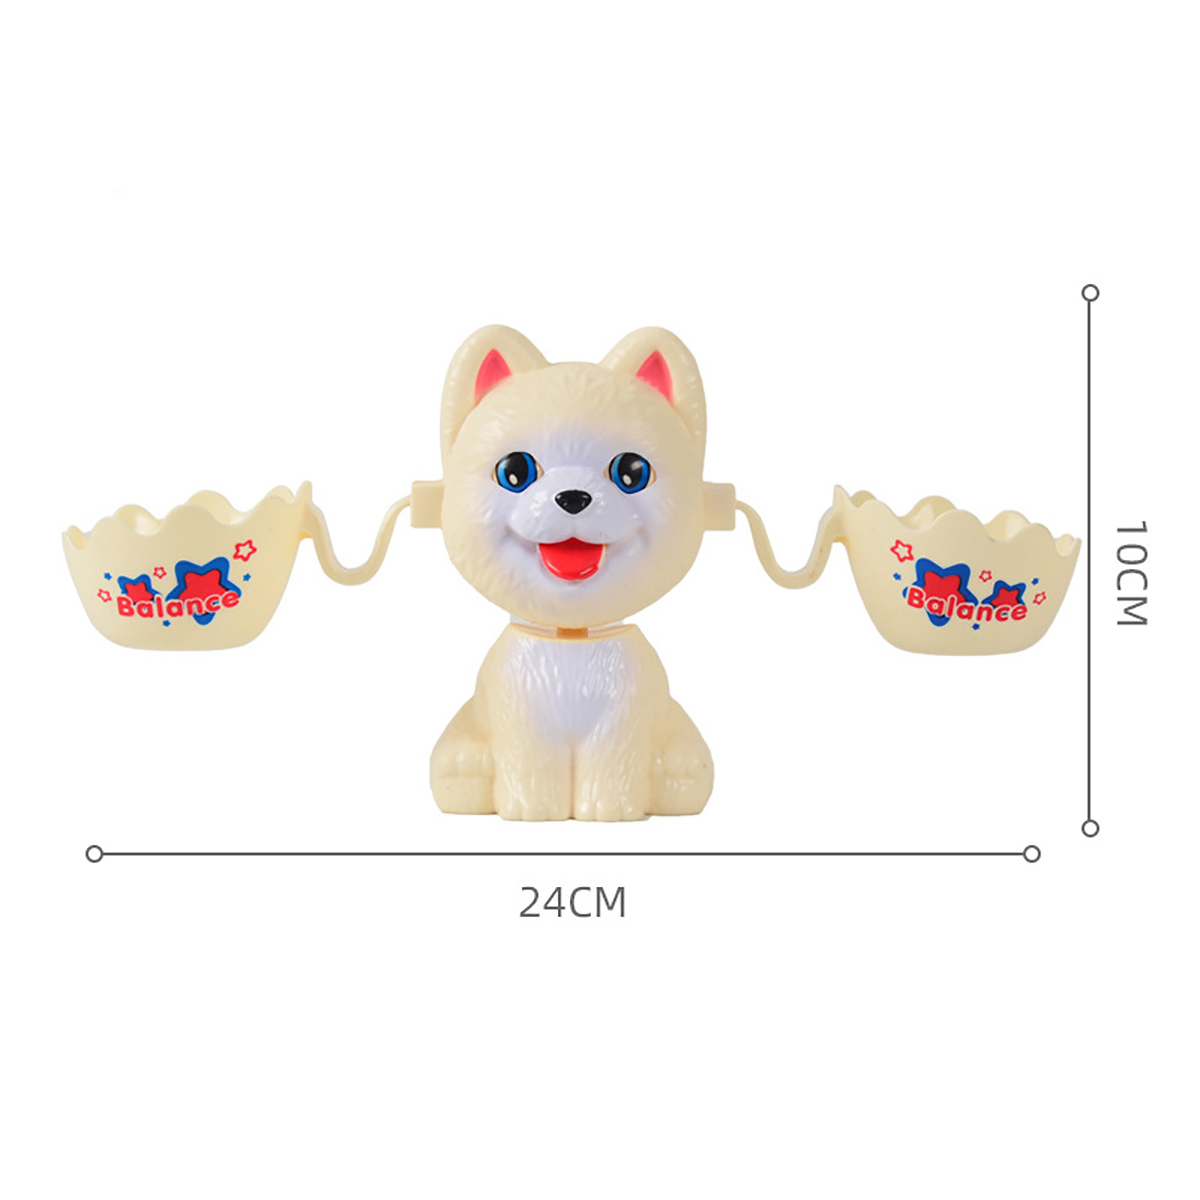 Puppy-Balance-Educational-Learn-Intellectual-Interaction-Counting-Numbers-and-Basic-Math-Game-Toys-f-1671977-11